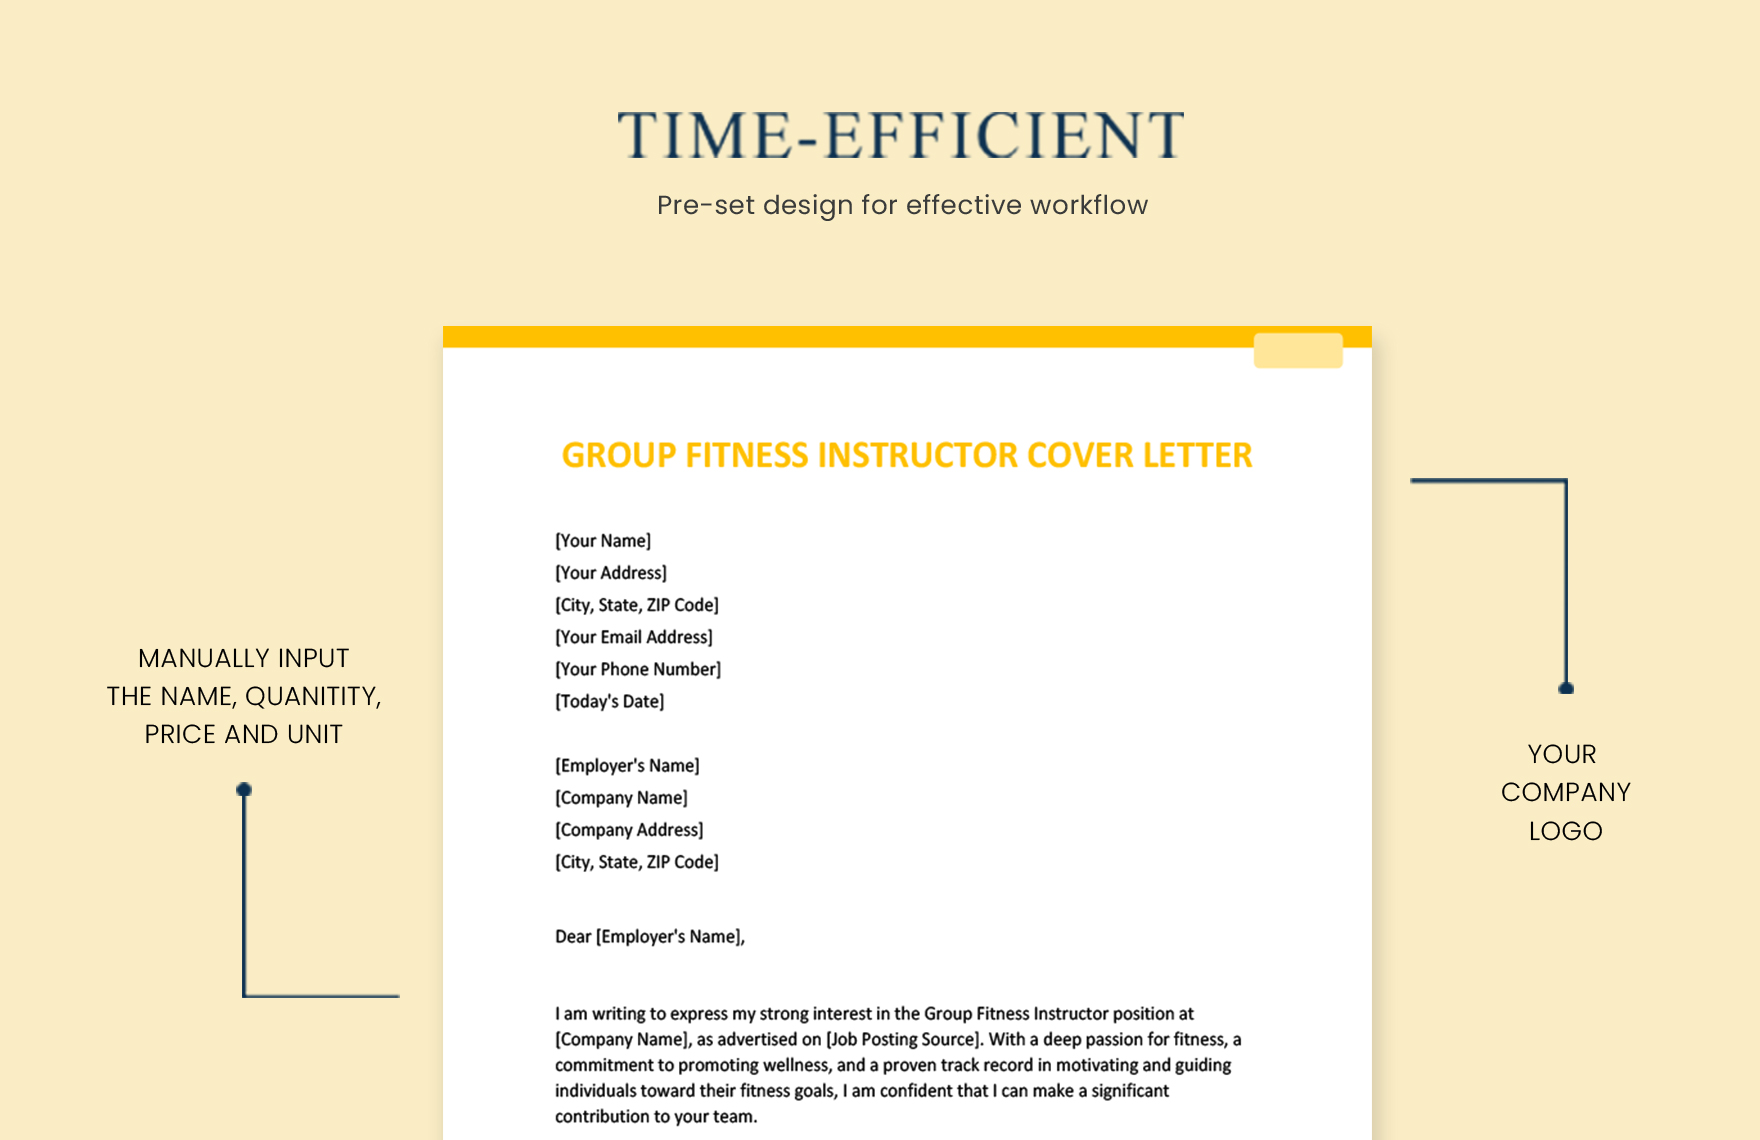 Group Fitness Instructor Cover Letter